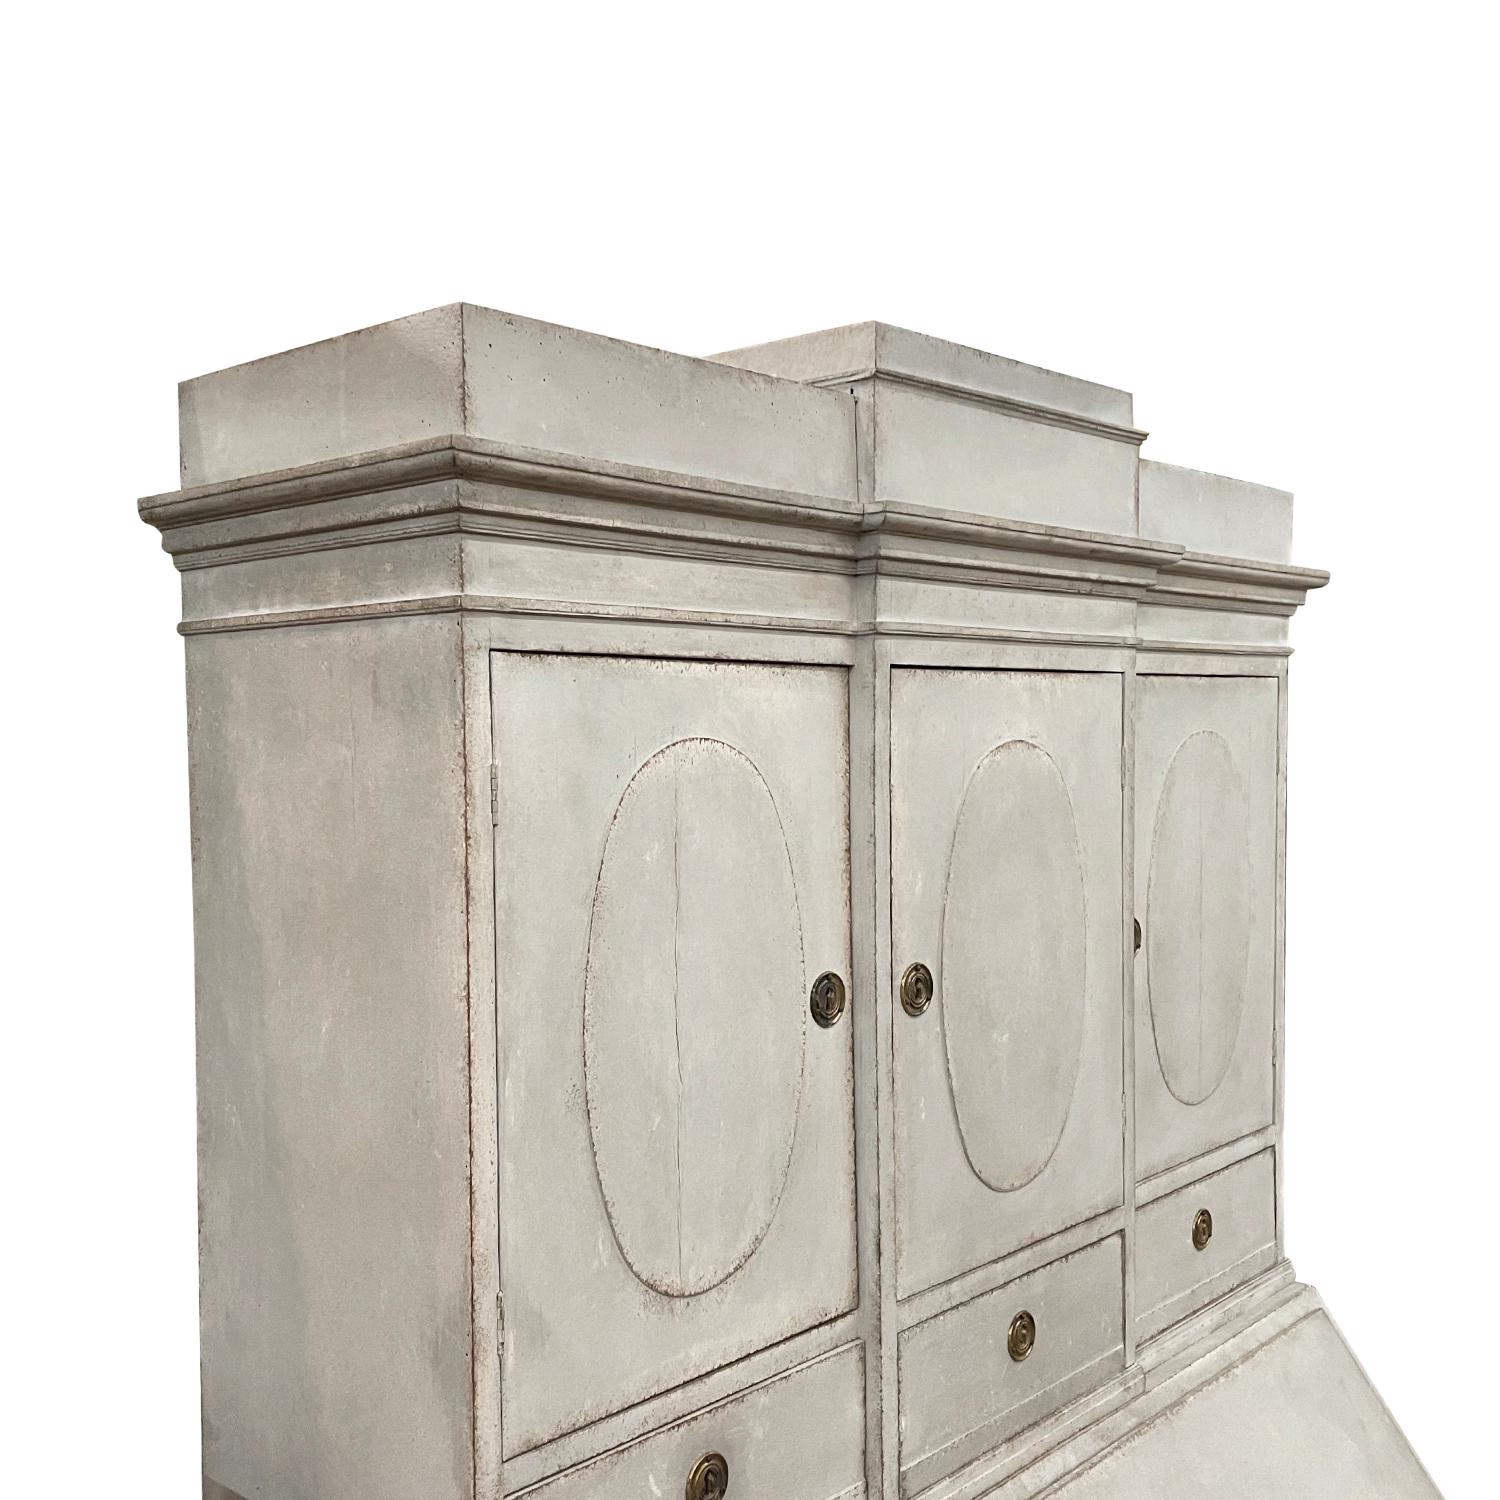 A 18th-19th century, light-grey, white antique Swedish Gustavian two part bureau made of hand crafted painted Pinewood, in good condition. The Scandinavian secretaire is composed with three upper doors and a writing flap, four large drawers and many